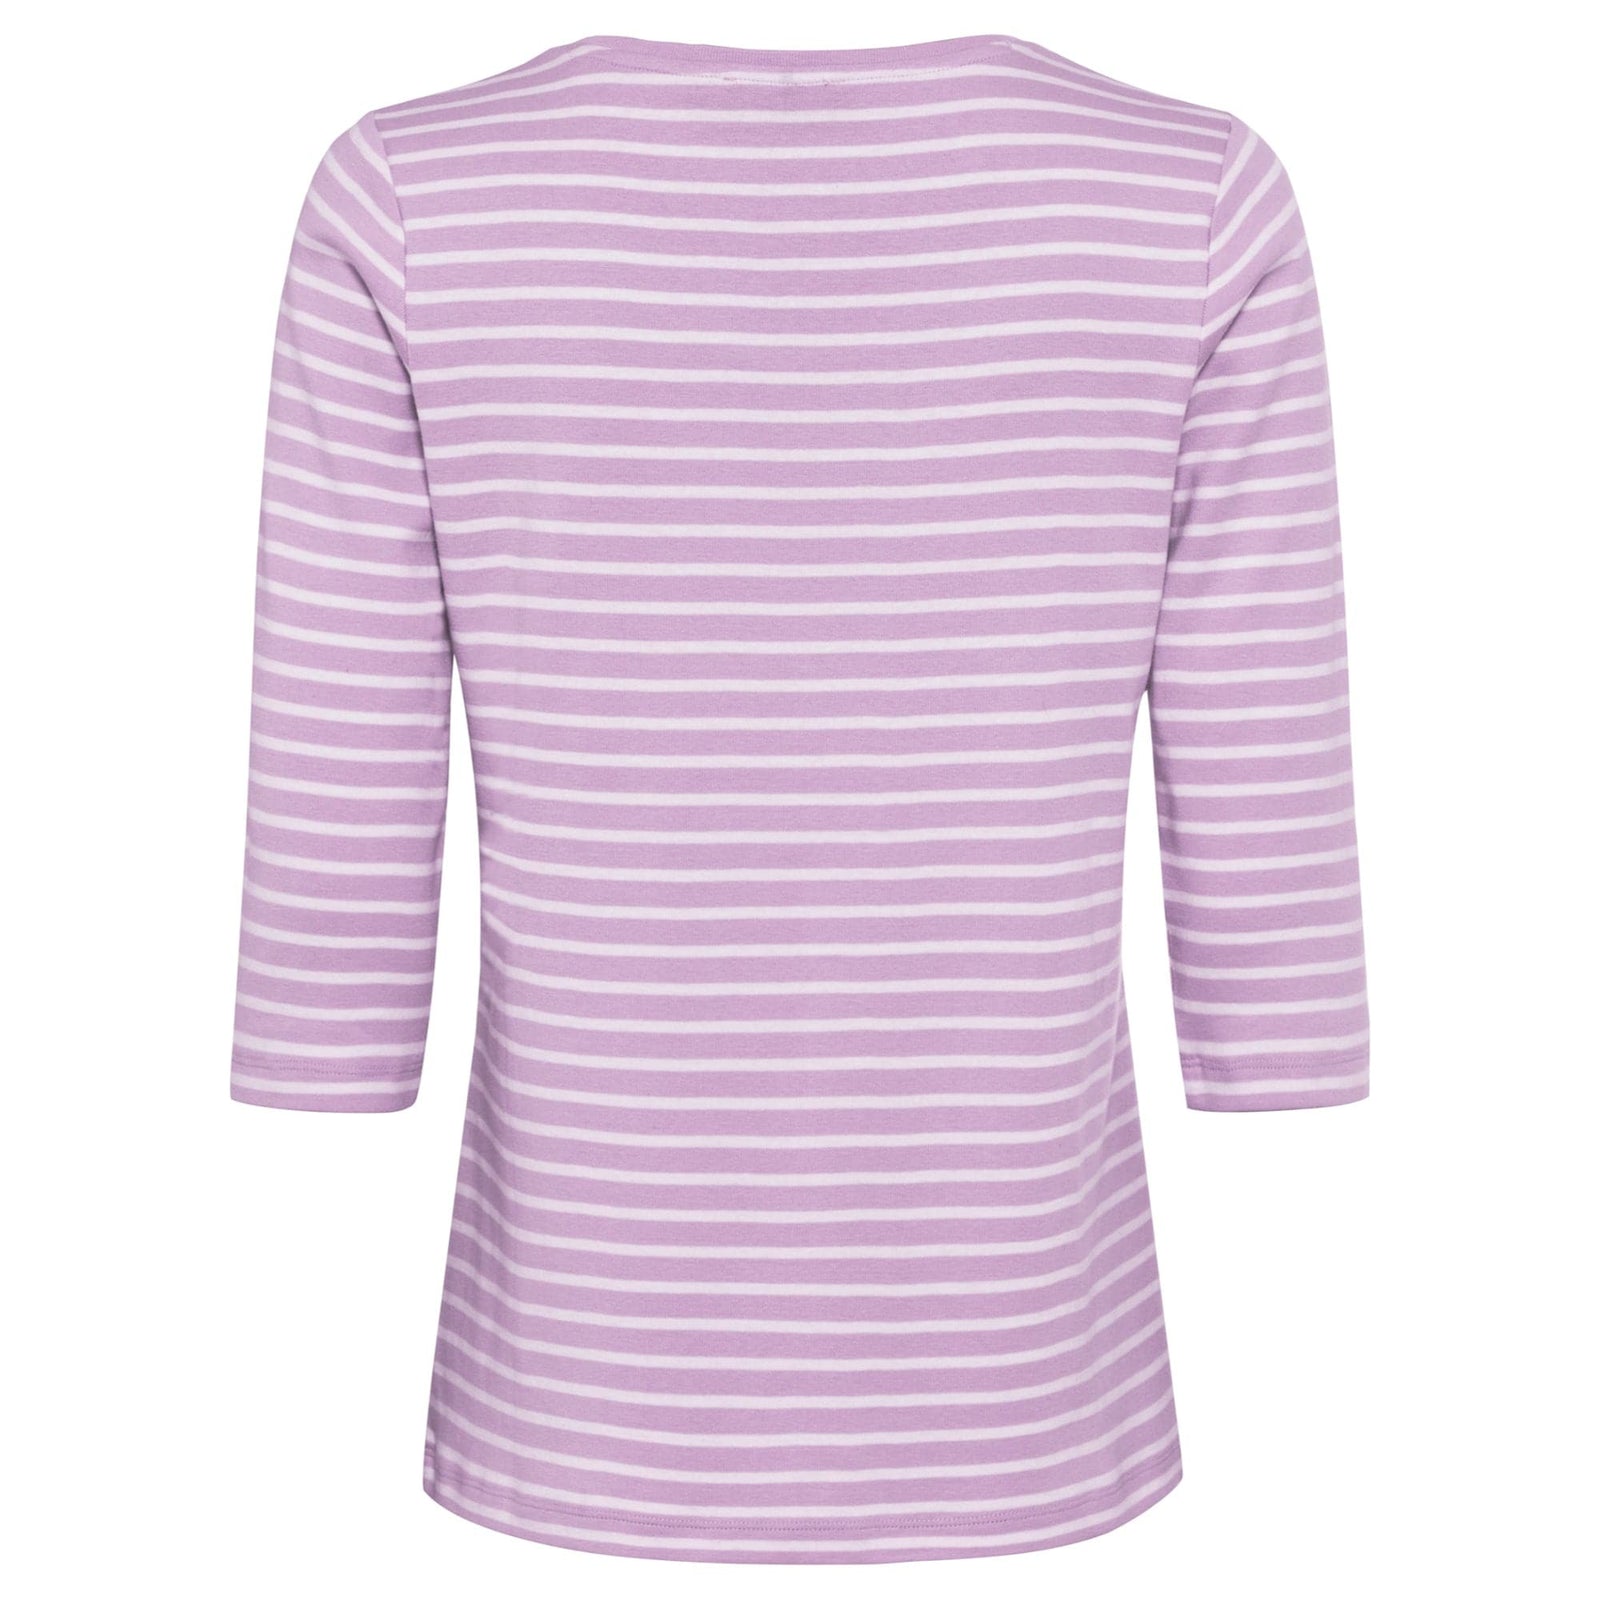 Olsen Striped Top In Hannah Fit in Lilac